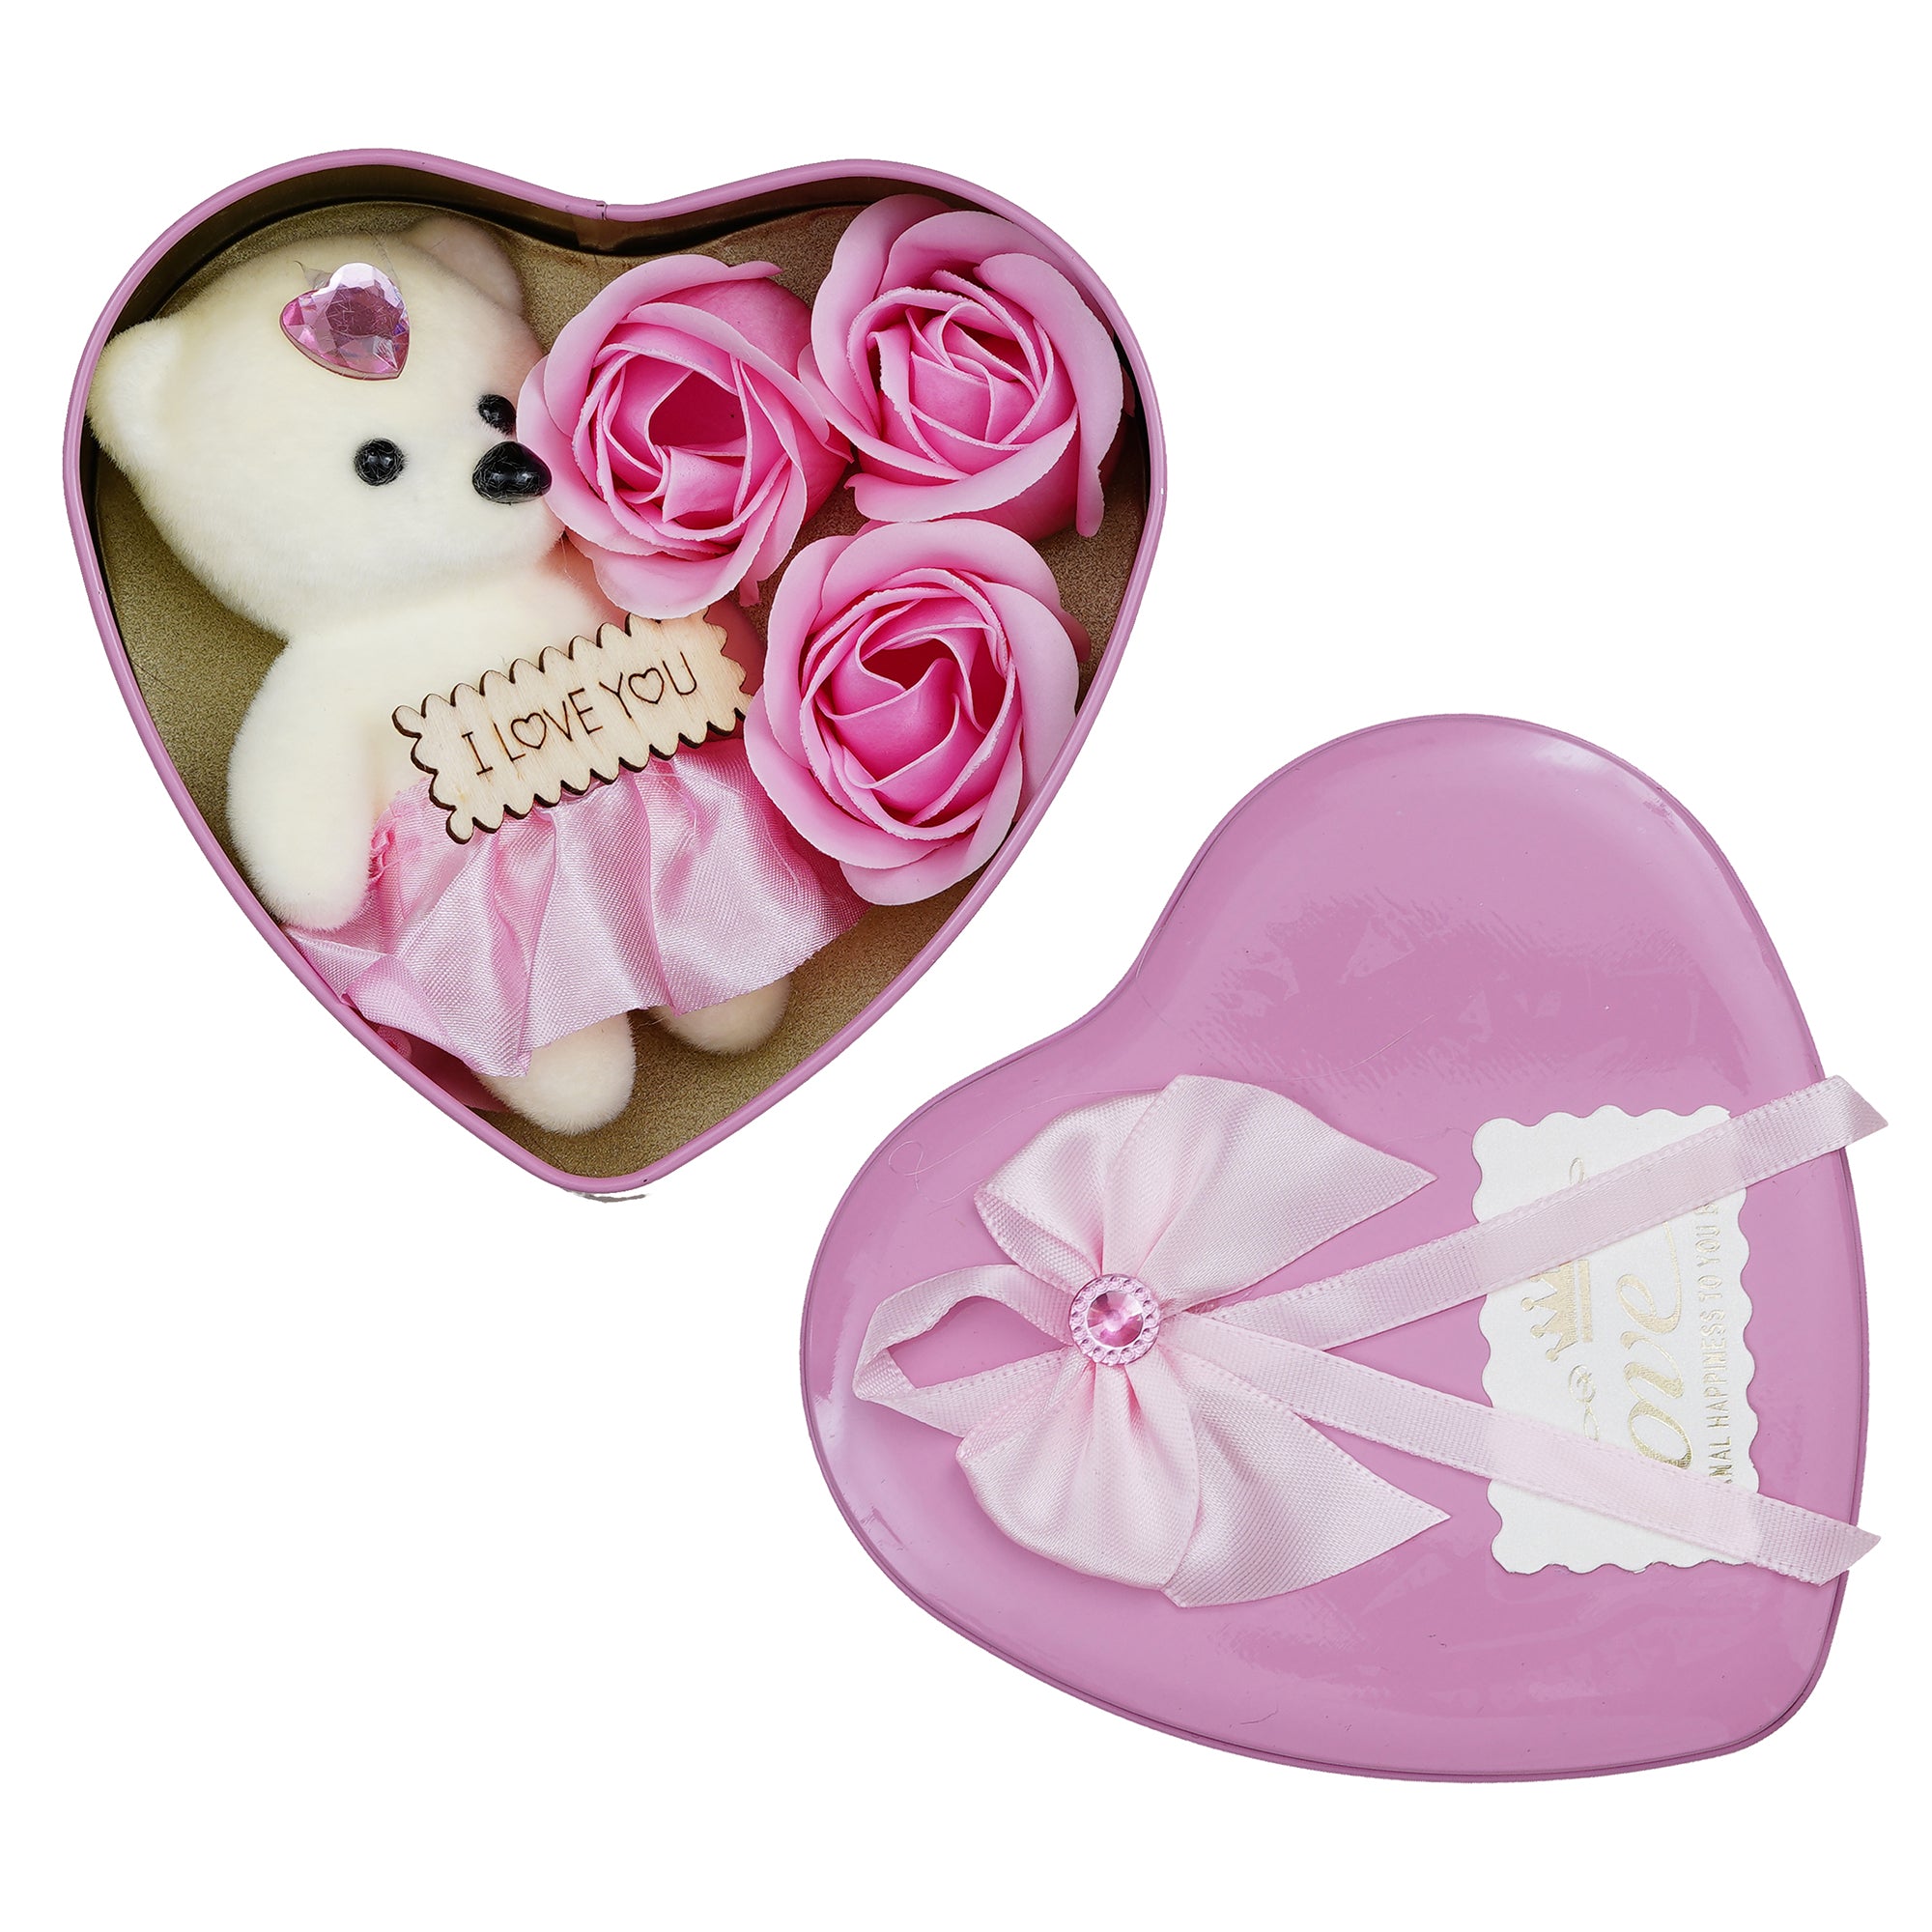 Pink Heart Shaped Gift Box With 3 Pink Roses, Teddy Bear, And A Card 3